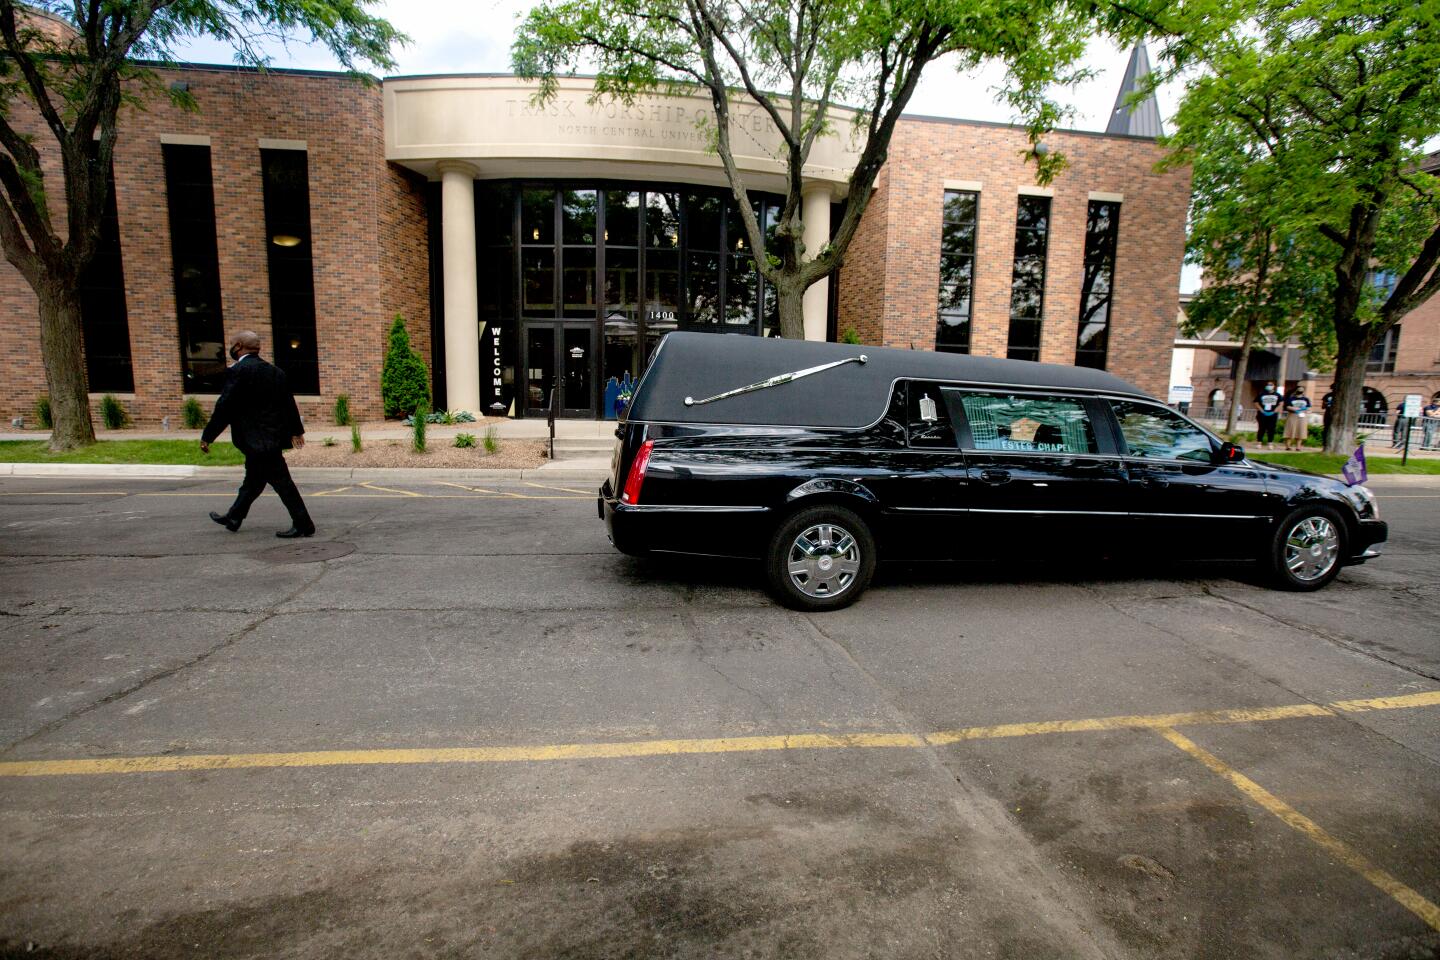 A hearse brings Floyd's casket to the Minneapolis service.